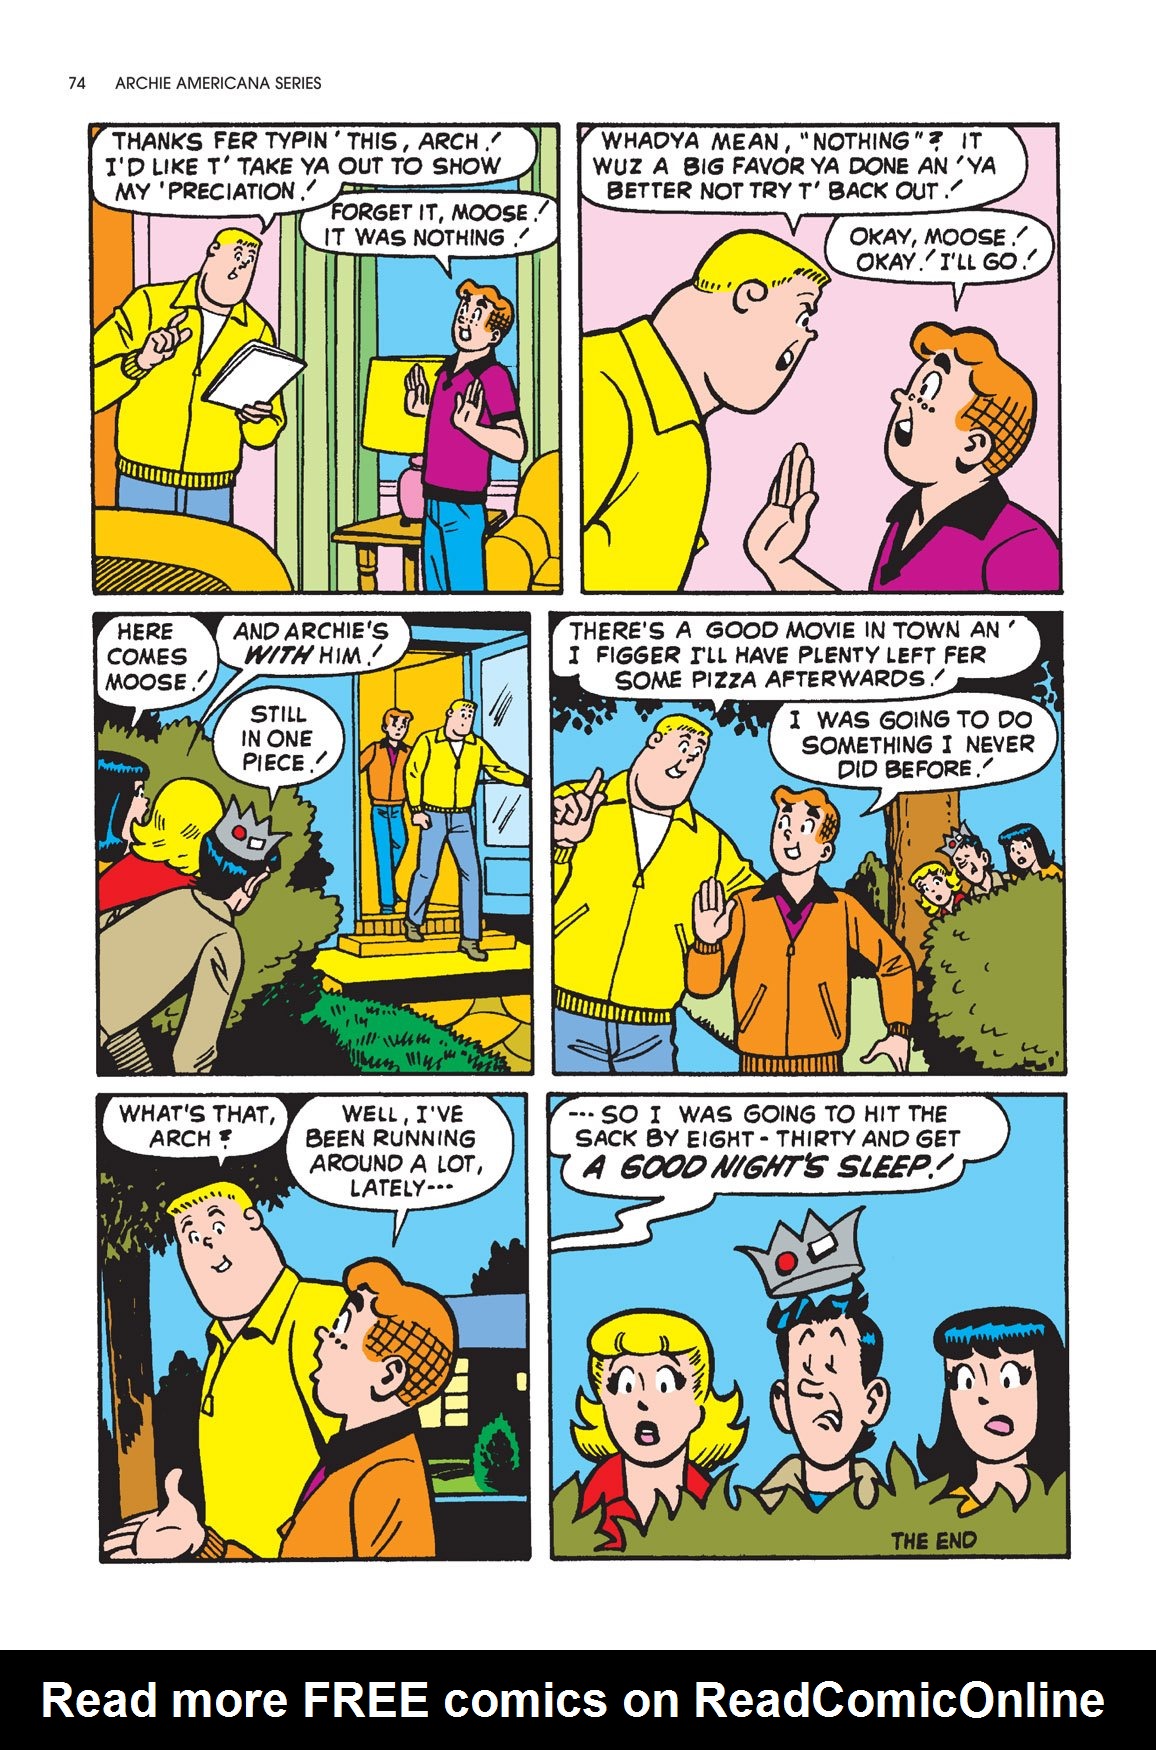 Read online Archie Americana Series comic -  Issue # TPB 10 - 75